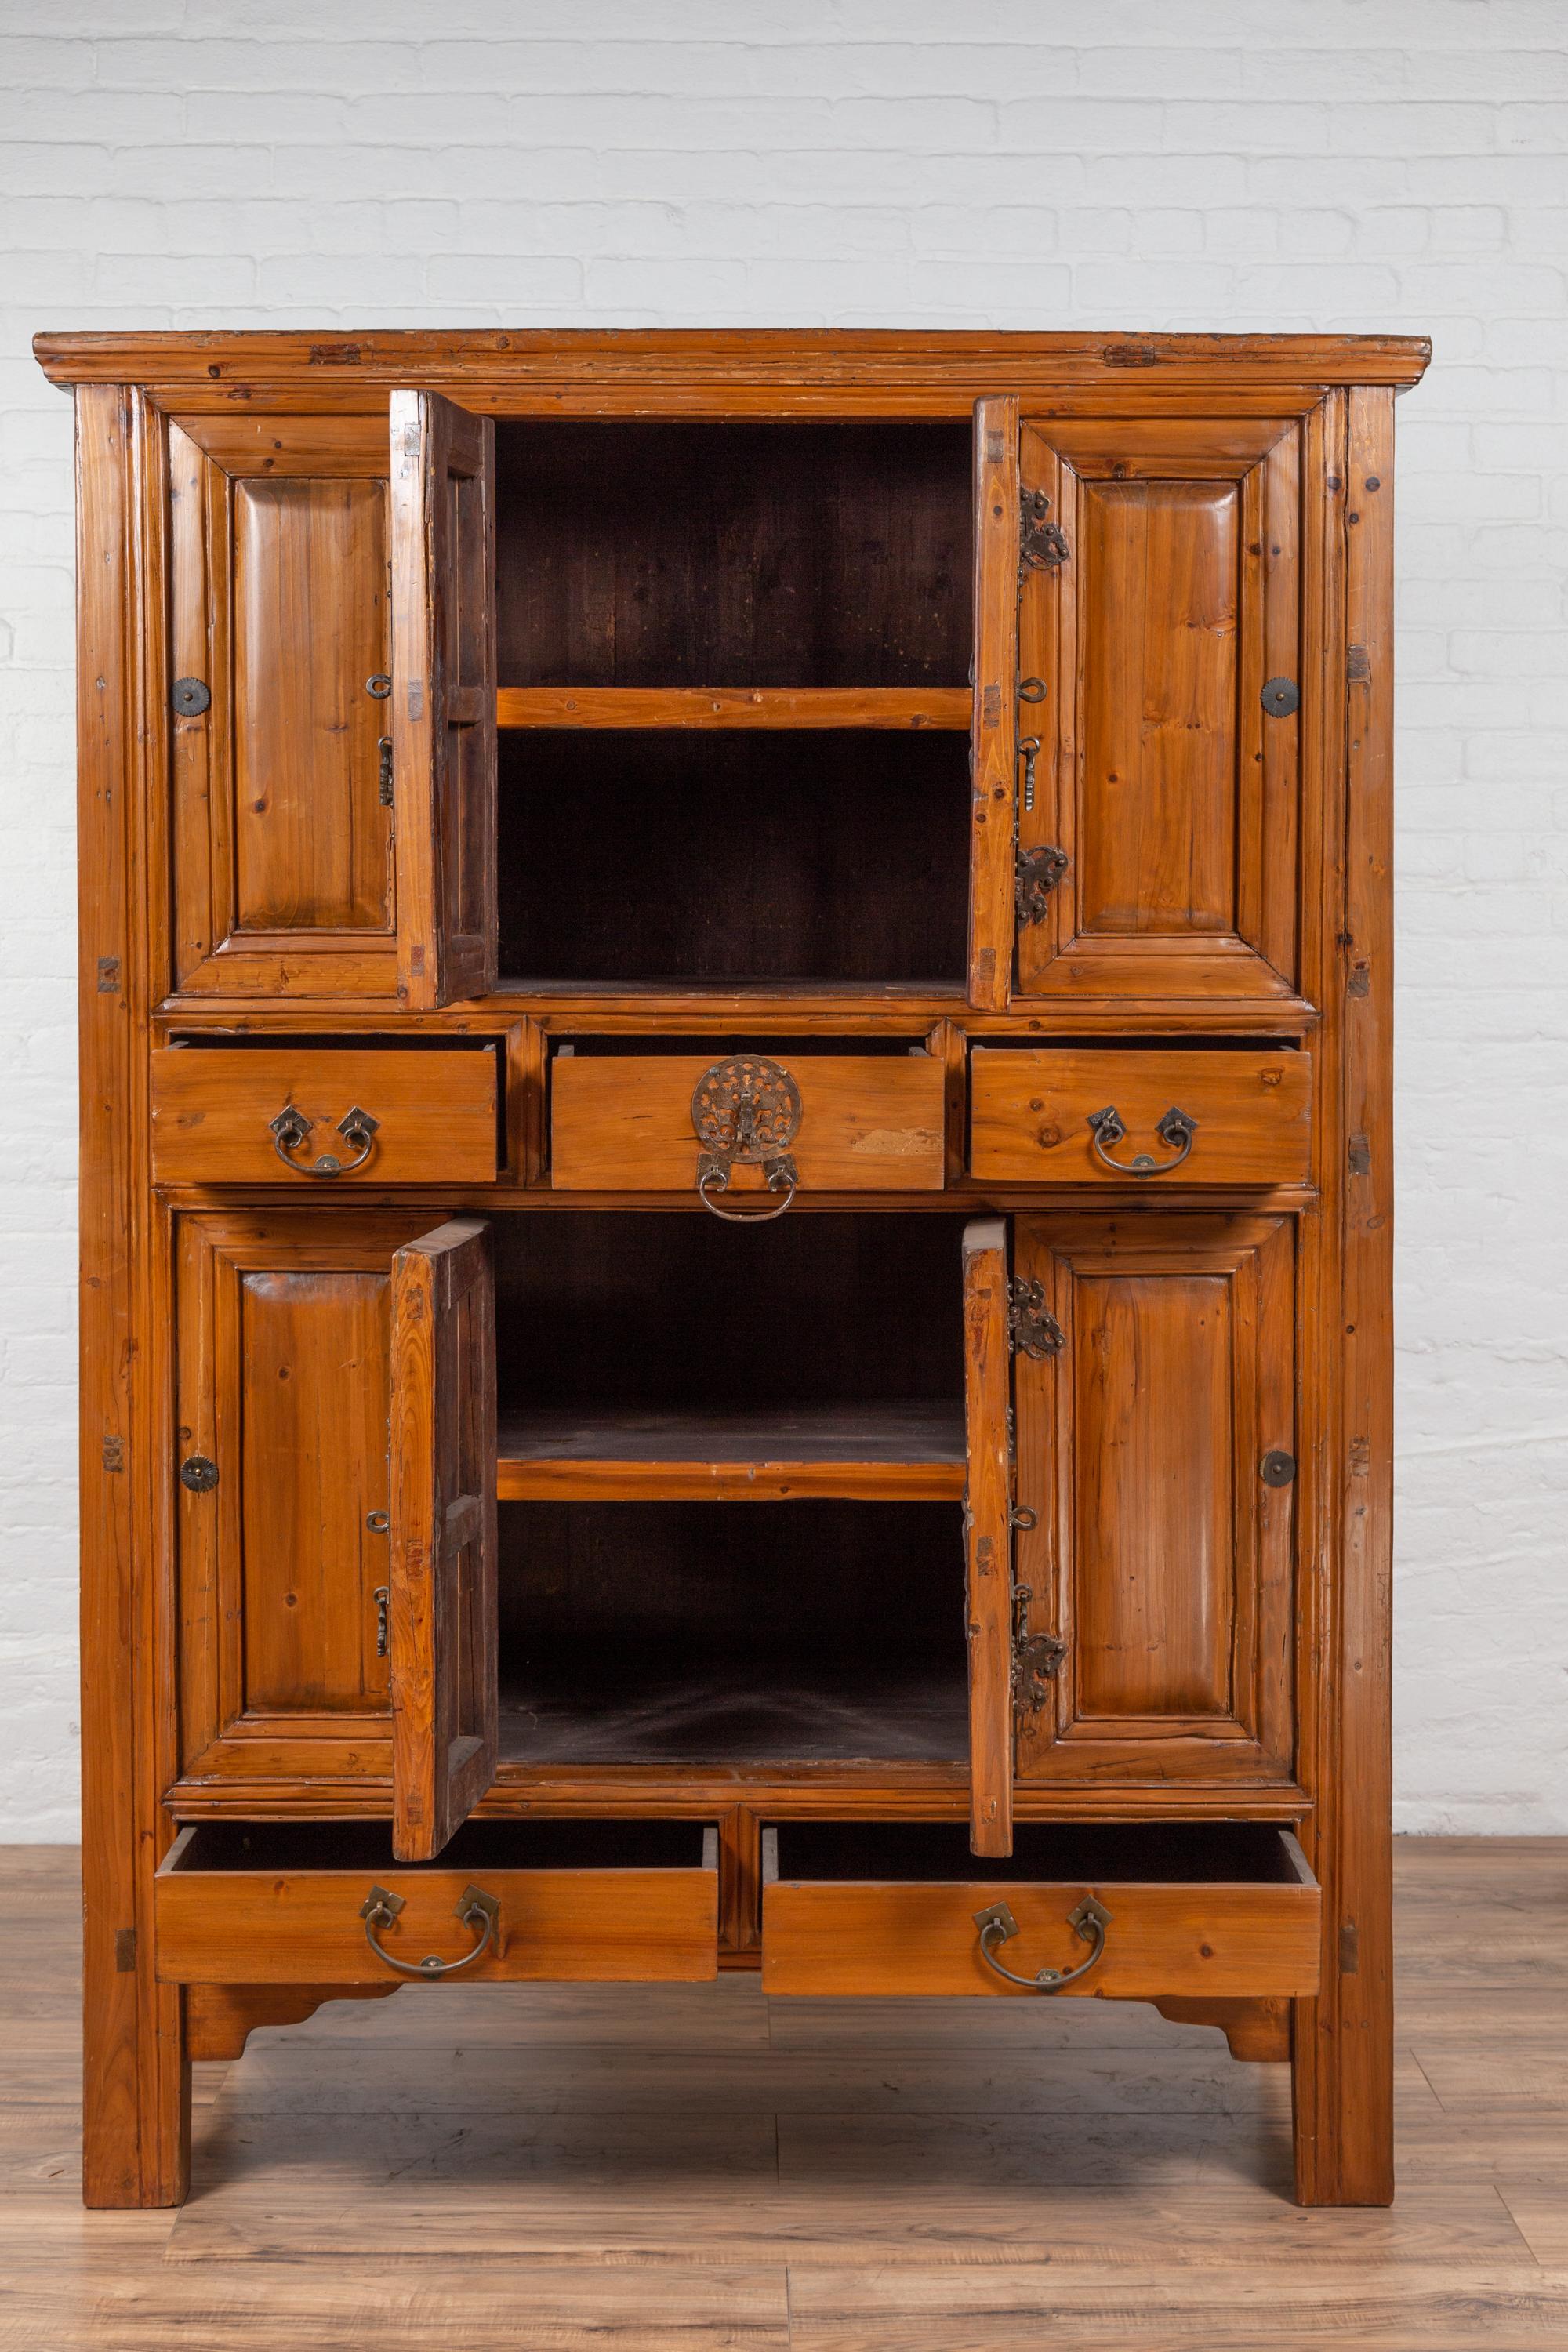 Large Chinese Qing Dynasty Style Wooden Cabinet with Paneled Doors and Drawers For Sale 7